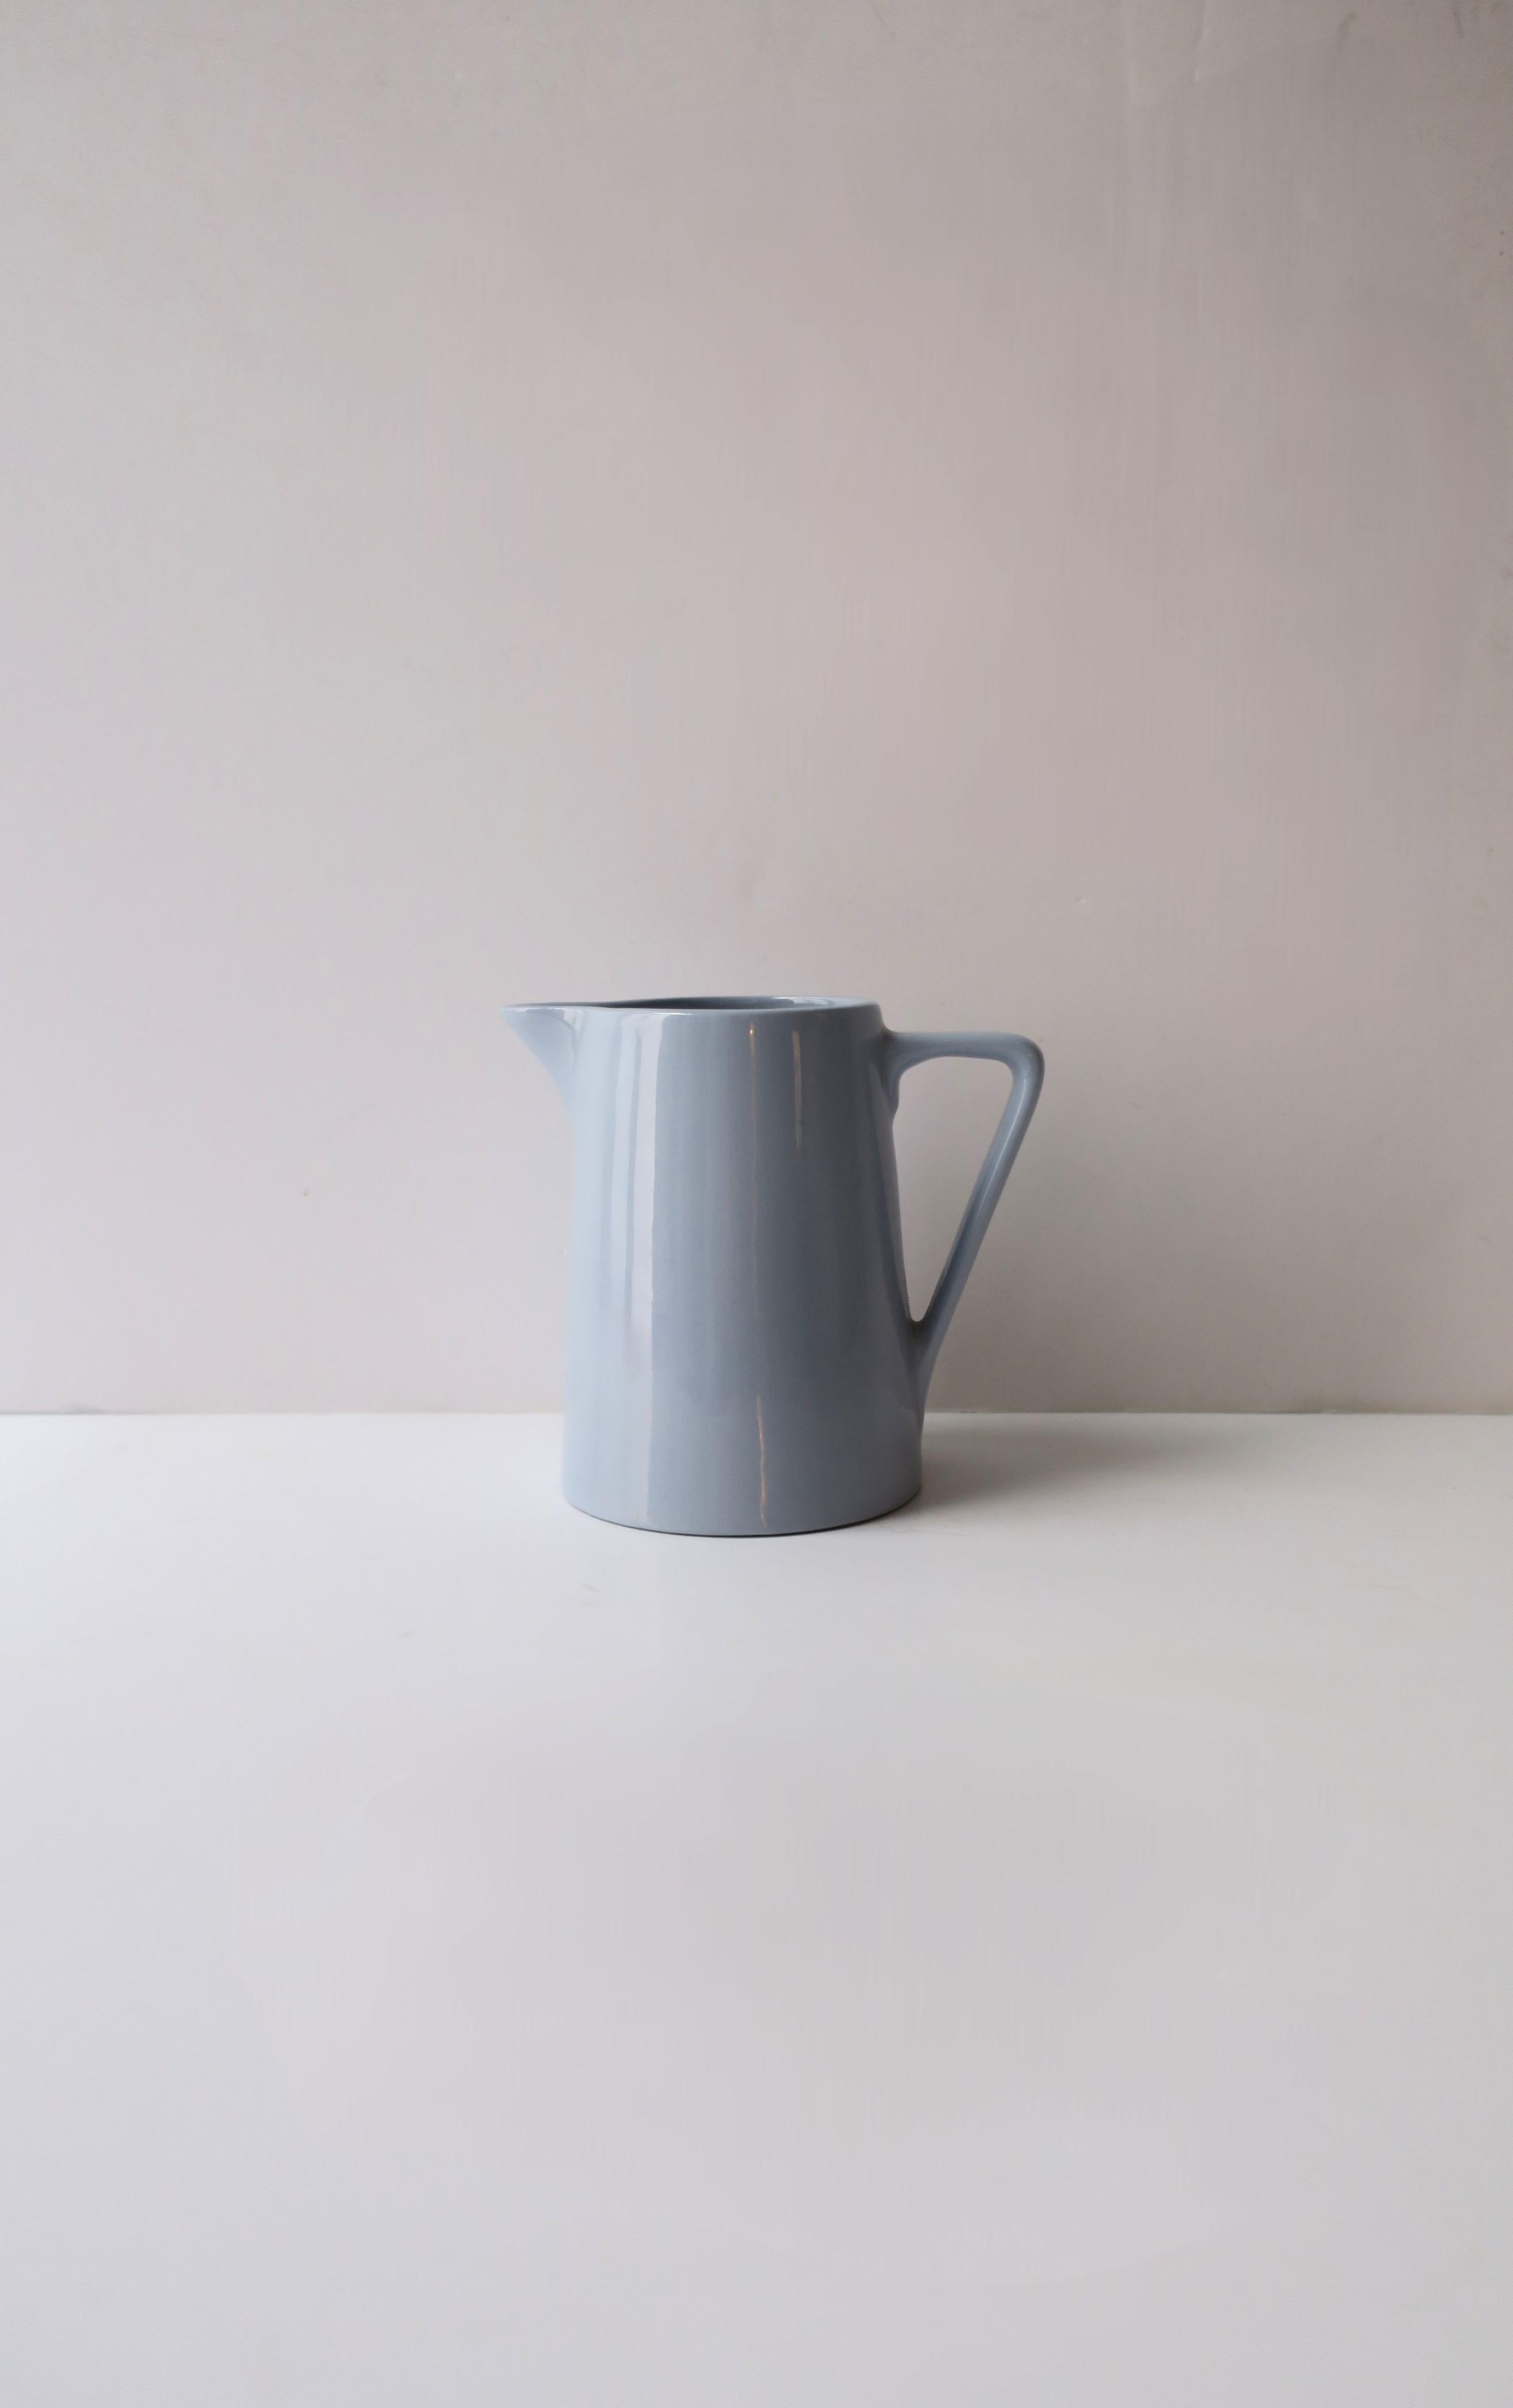 An English blue (cornflower blue) ceramic pitcher, Art Deco period, by Johnson Brothers, circa early-20th century, England. Beautiful as a standalone piece, for liquids, as a vase, etc. Many uses. Marked on underside as shown in last image; 'Johnson